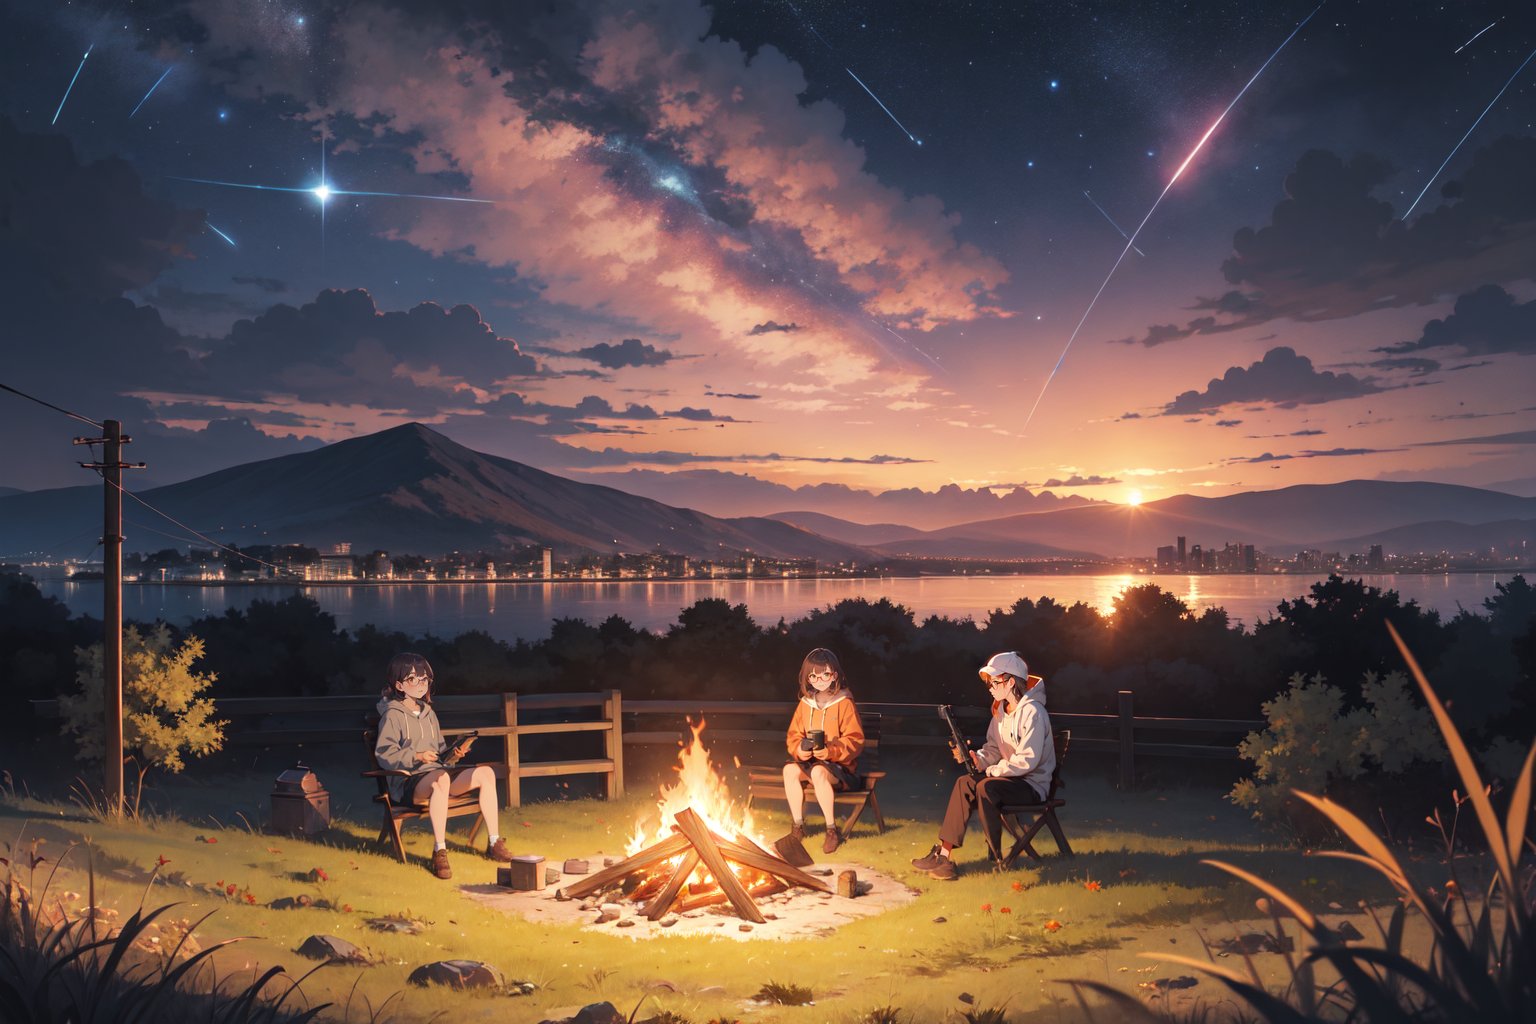 (masterpiece:1.3), (absurdres:1.3), (best quality:1.3), (ultra-detailed:1.3), 1girl, bespectacled, hoddie, autumn, autumn leaves, building, burning, campfire, city, city lights, cityscape, cloud, cloudy sky, diffraction spikes, dusk, evening, fire, fireplace, flame, gradient sky, grass, hill, horizon, lens flare, maple leaf, molten rock, mountain, mountainous horizon, nature, no humans, ocean, orange sky, orange theme, outdoors, palm tree, power lines, purple sky, red sky, scenery, shooting star, sky, star \(sky\), starry sky, sun, sunlight, sunrise, sunset, tree, twilight, utility pole, water, yellow sky